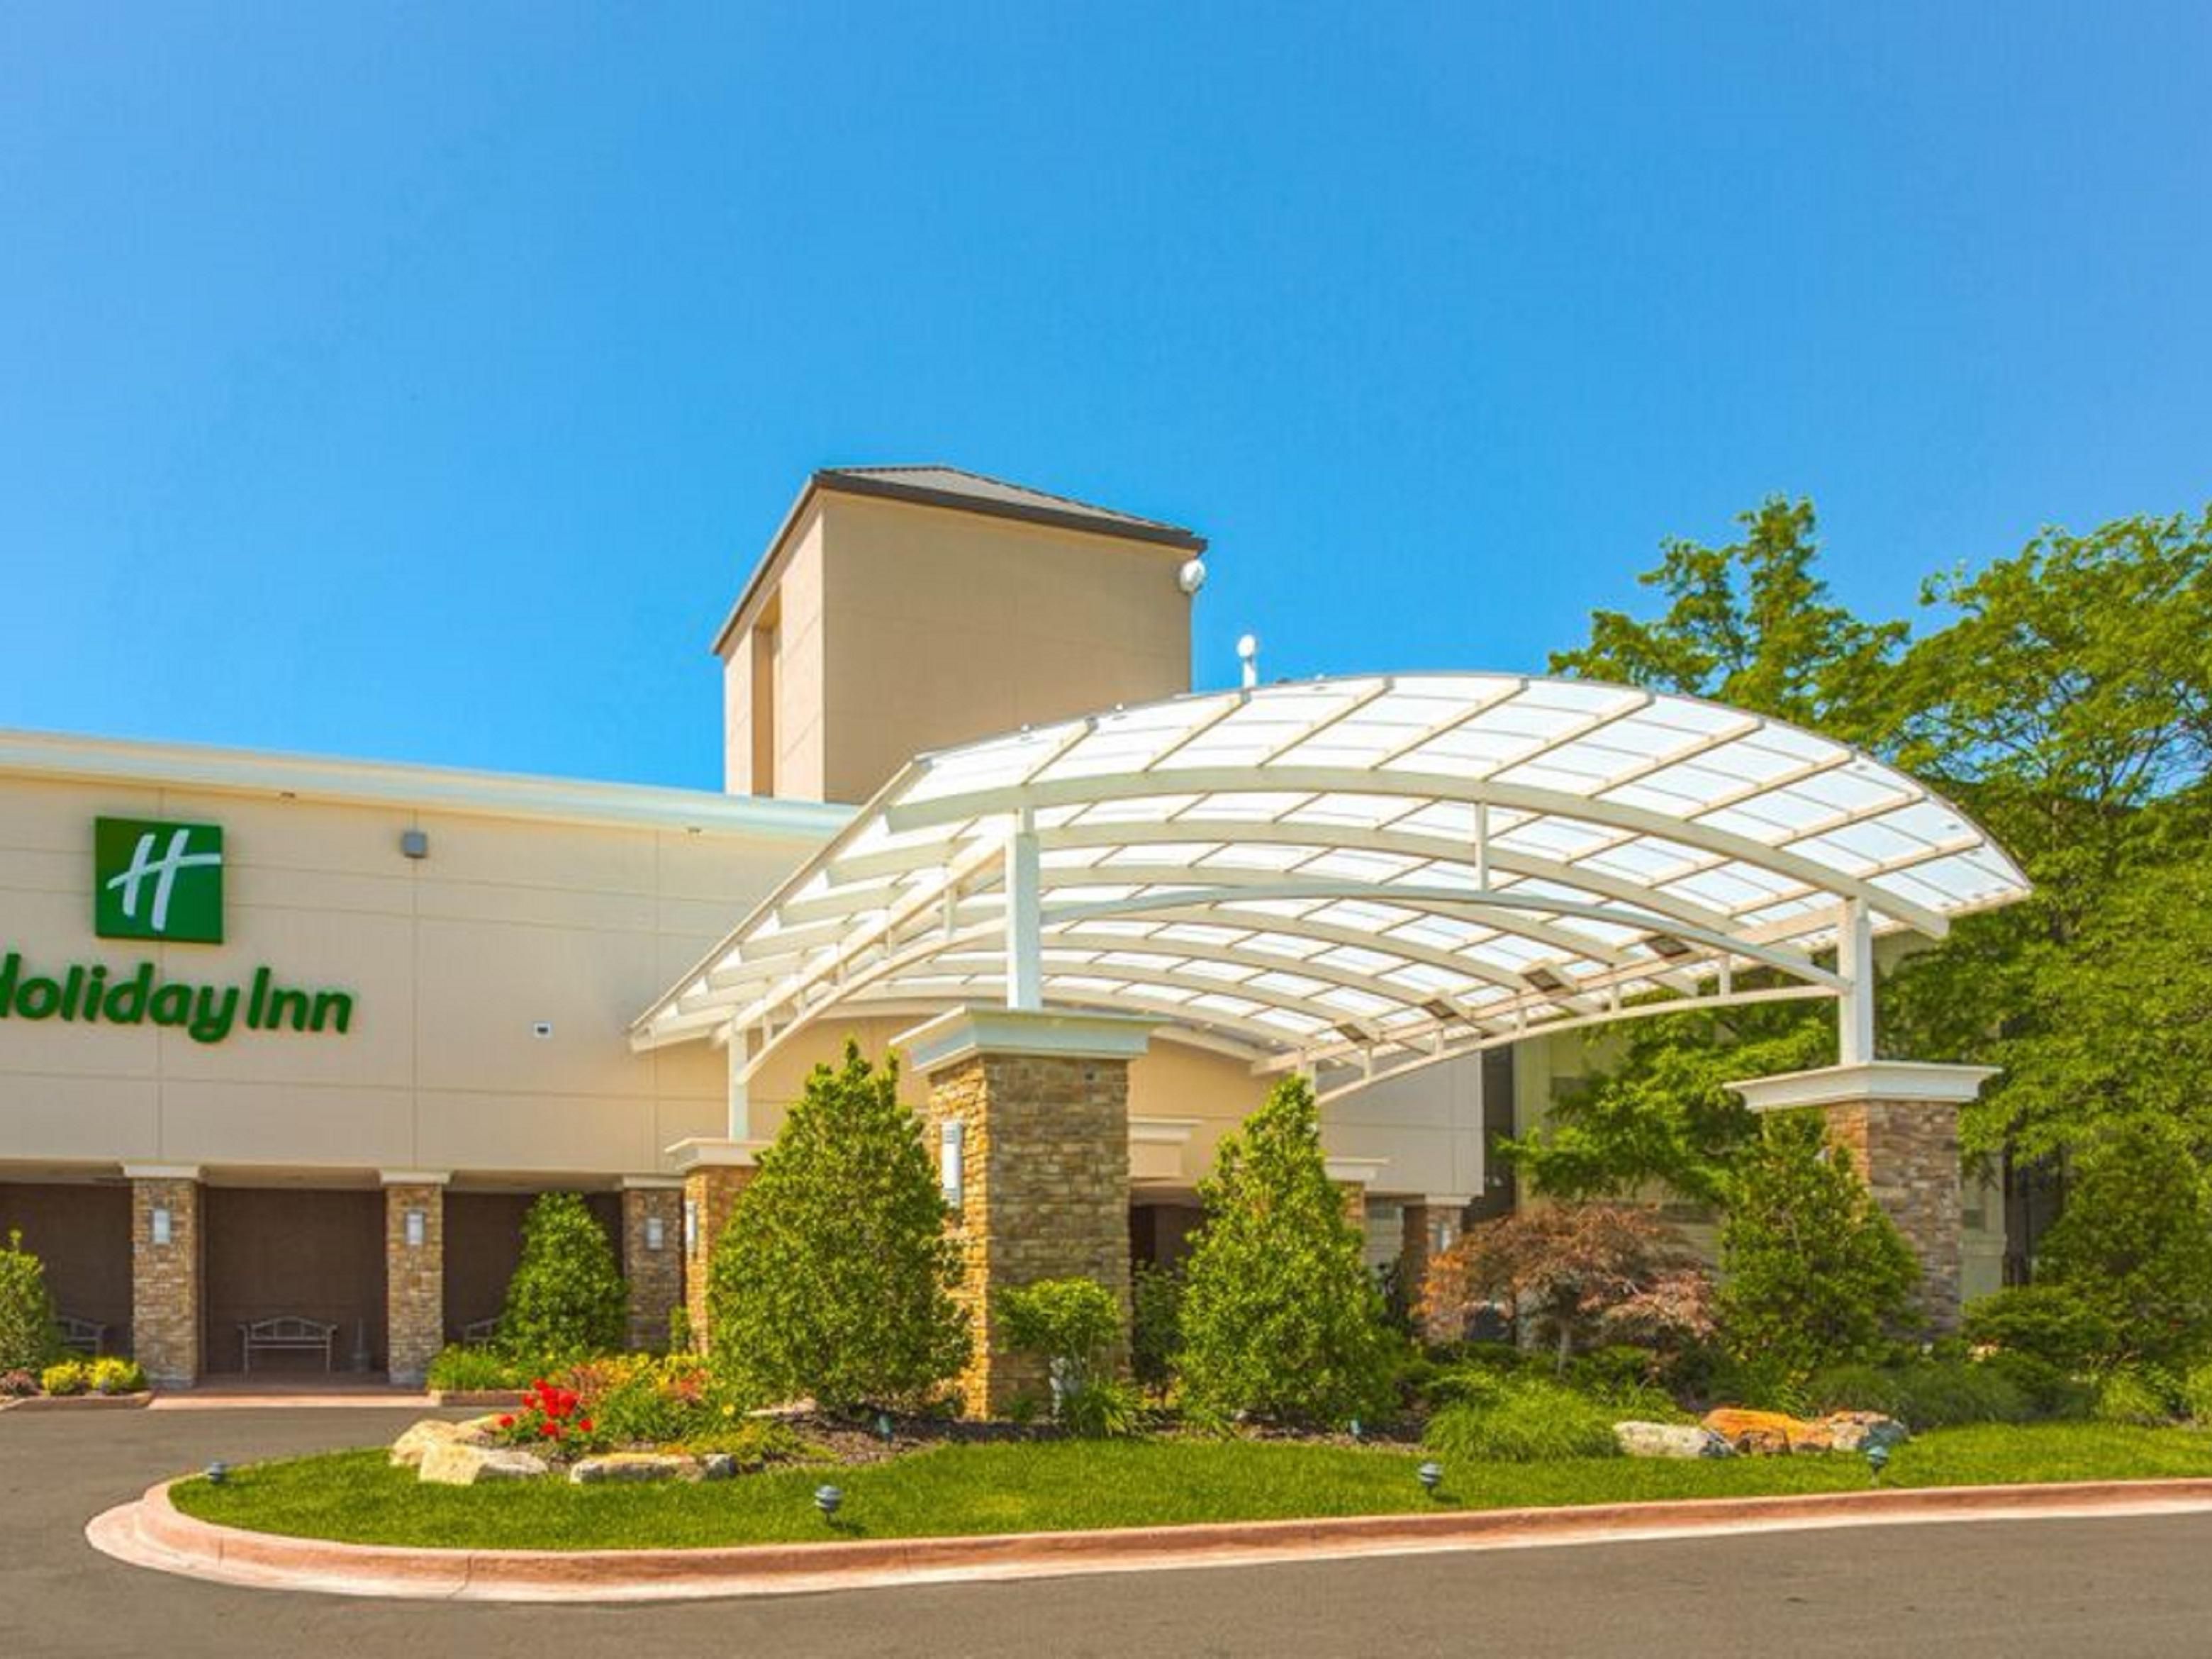 Whether you dream of an intimate, private reception for 50 or a lavish ballroom gala for 500, the Holiday Inn Executive Center in Columbia, MO specializes in making your wedding dreams come true.